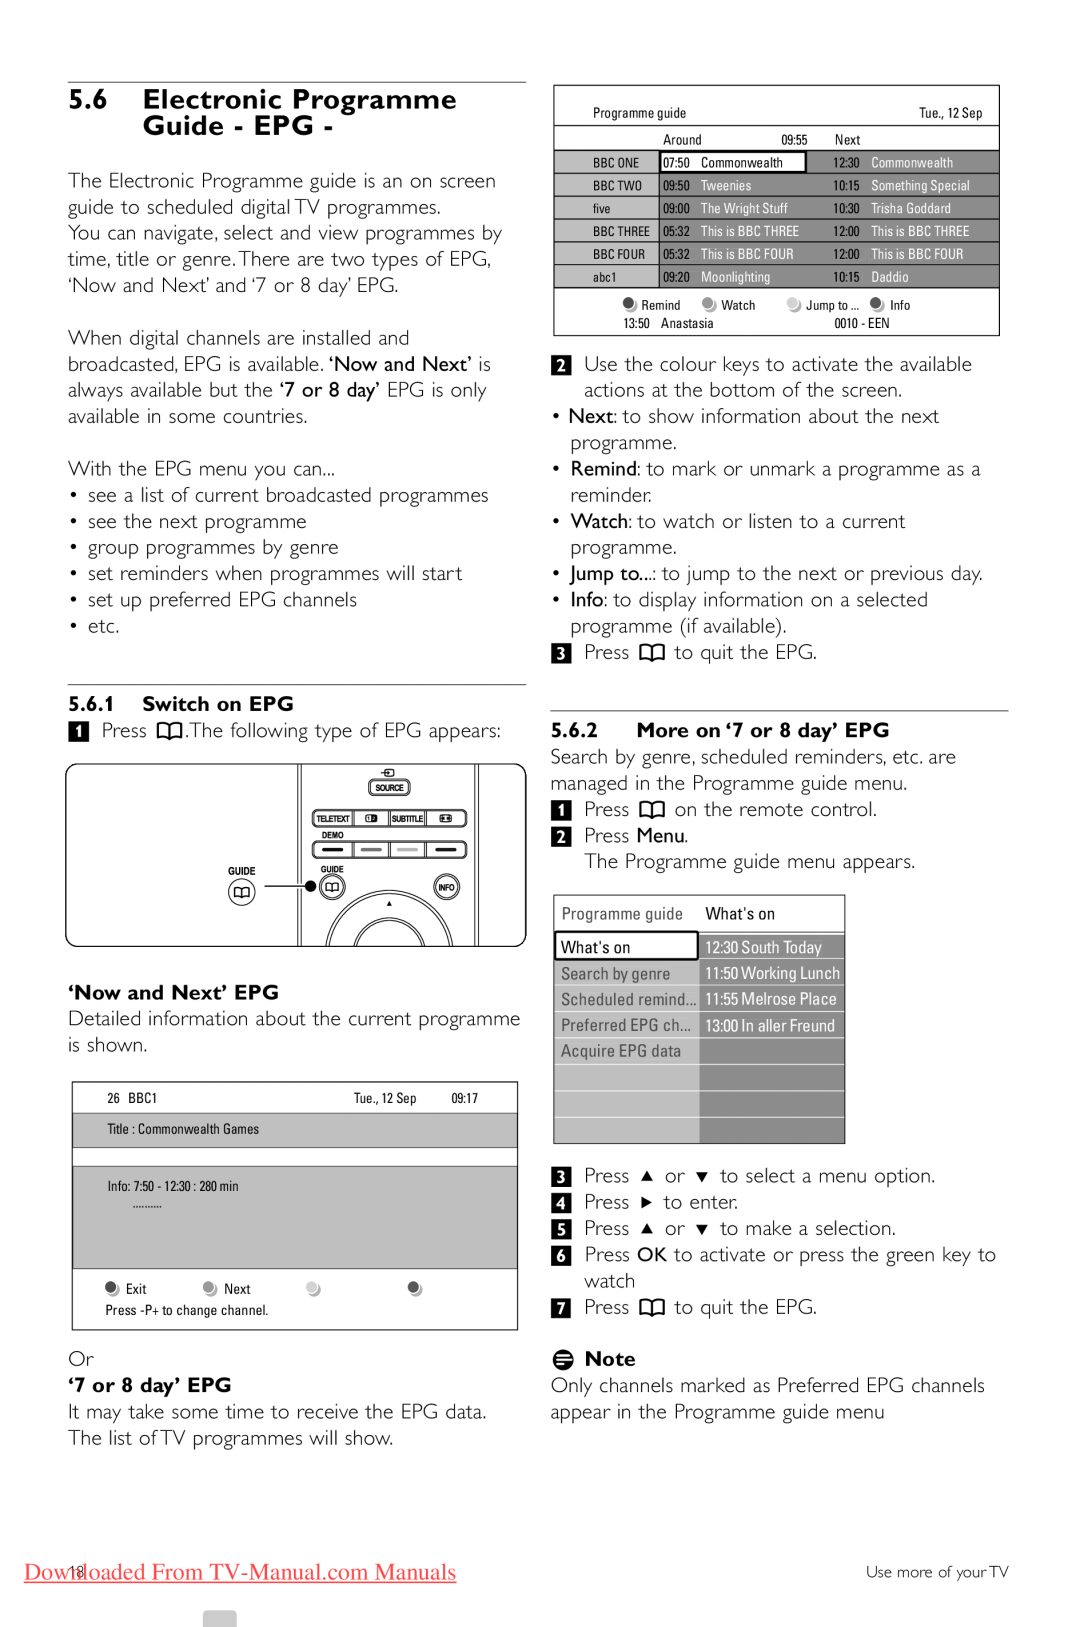 Philips 42PFL5403 5.6Electronic Programme Guide - EPG, 5.6.1Switch on EPG, ‘Now and Next’ EPG, ‘7 or 8 day’ EPG, rNote 